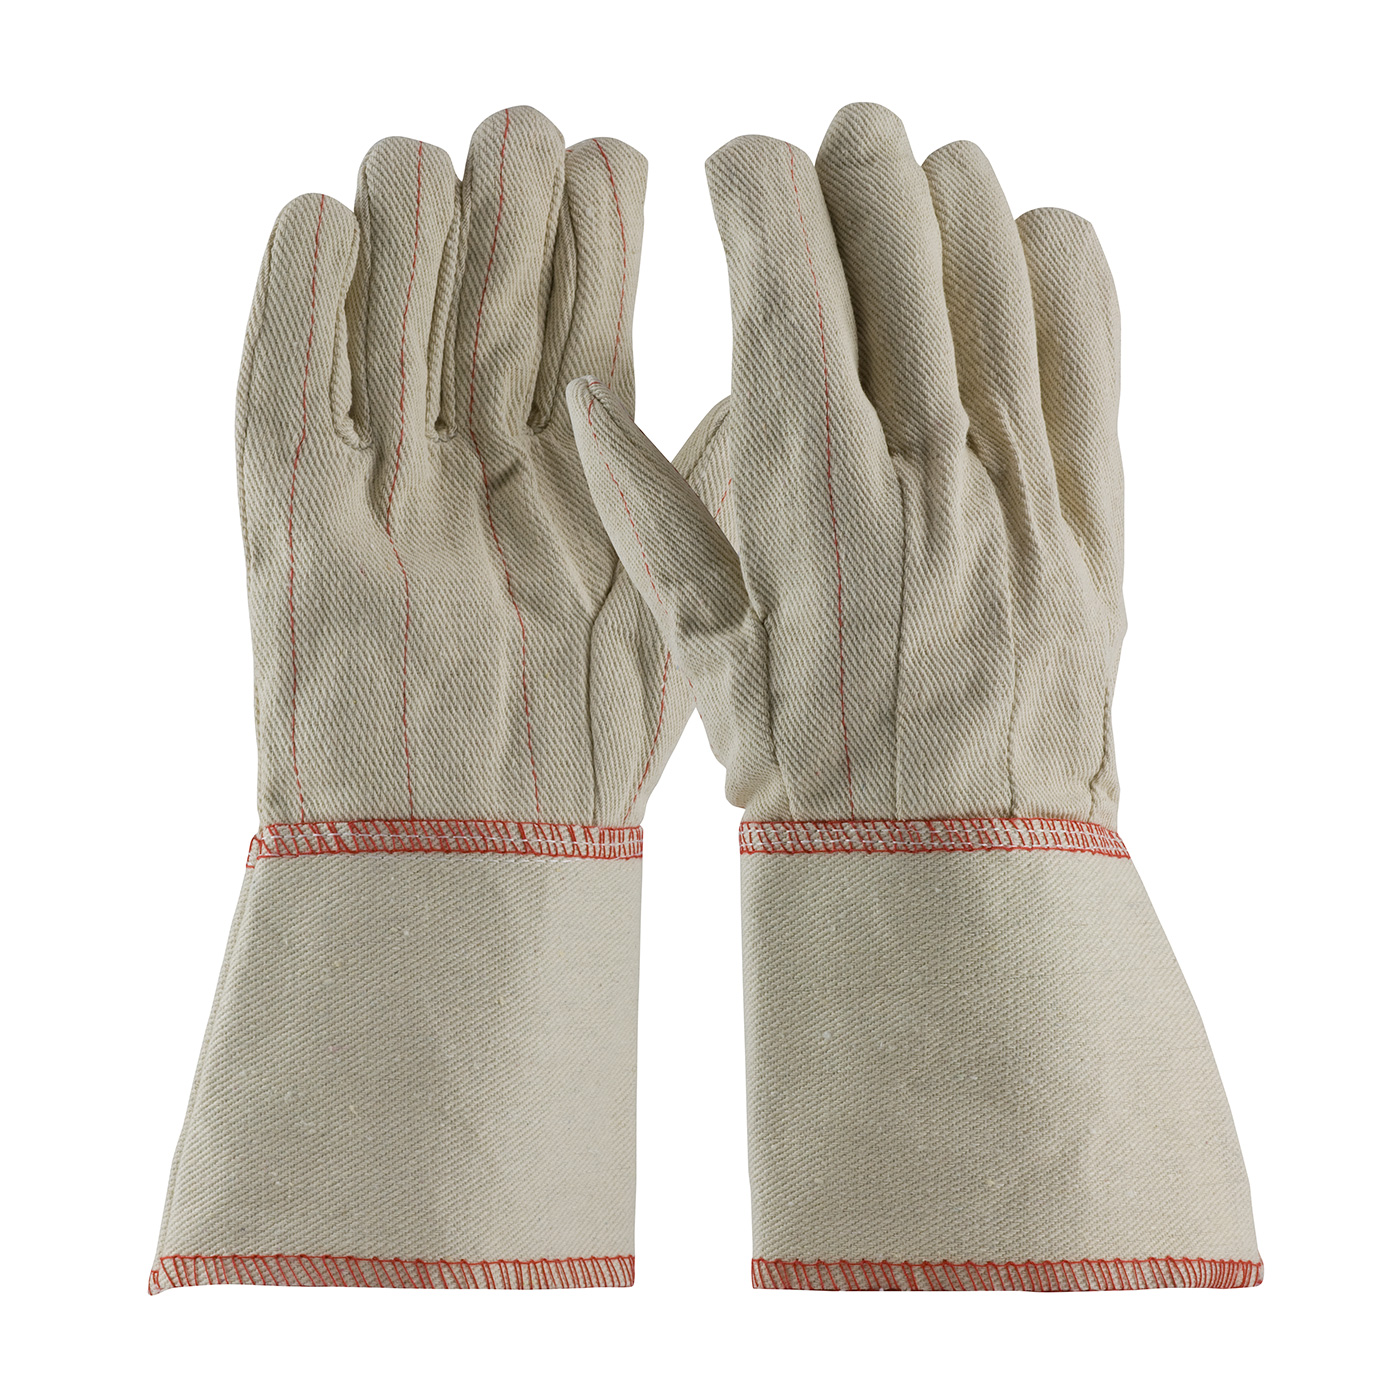 PIP Men's Natural 18oz. Nap-in Finish Double Palm Cotton Canvas Gloves - Gauntlet Cuff